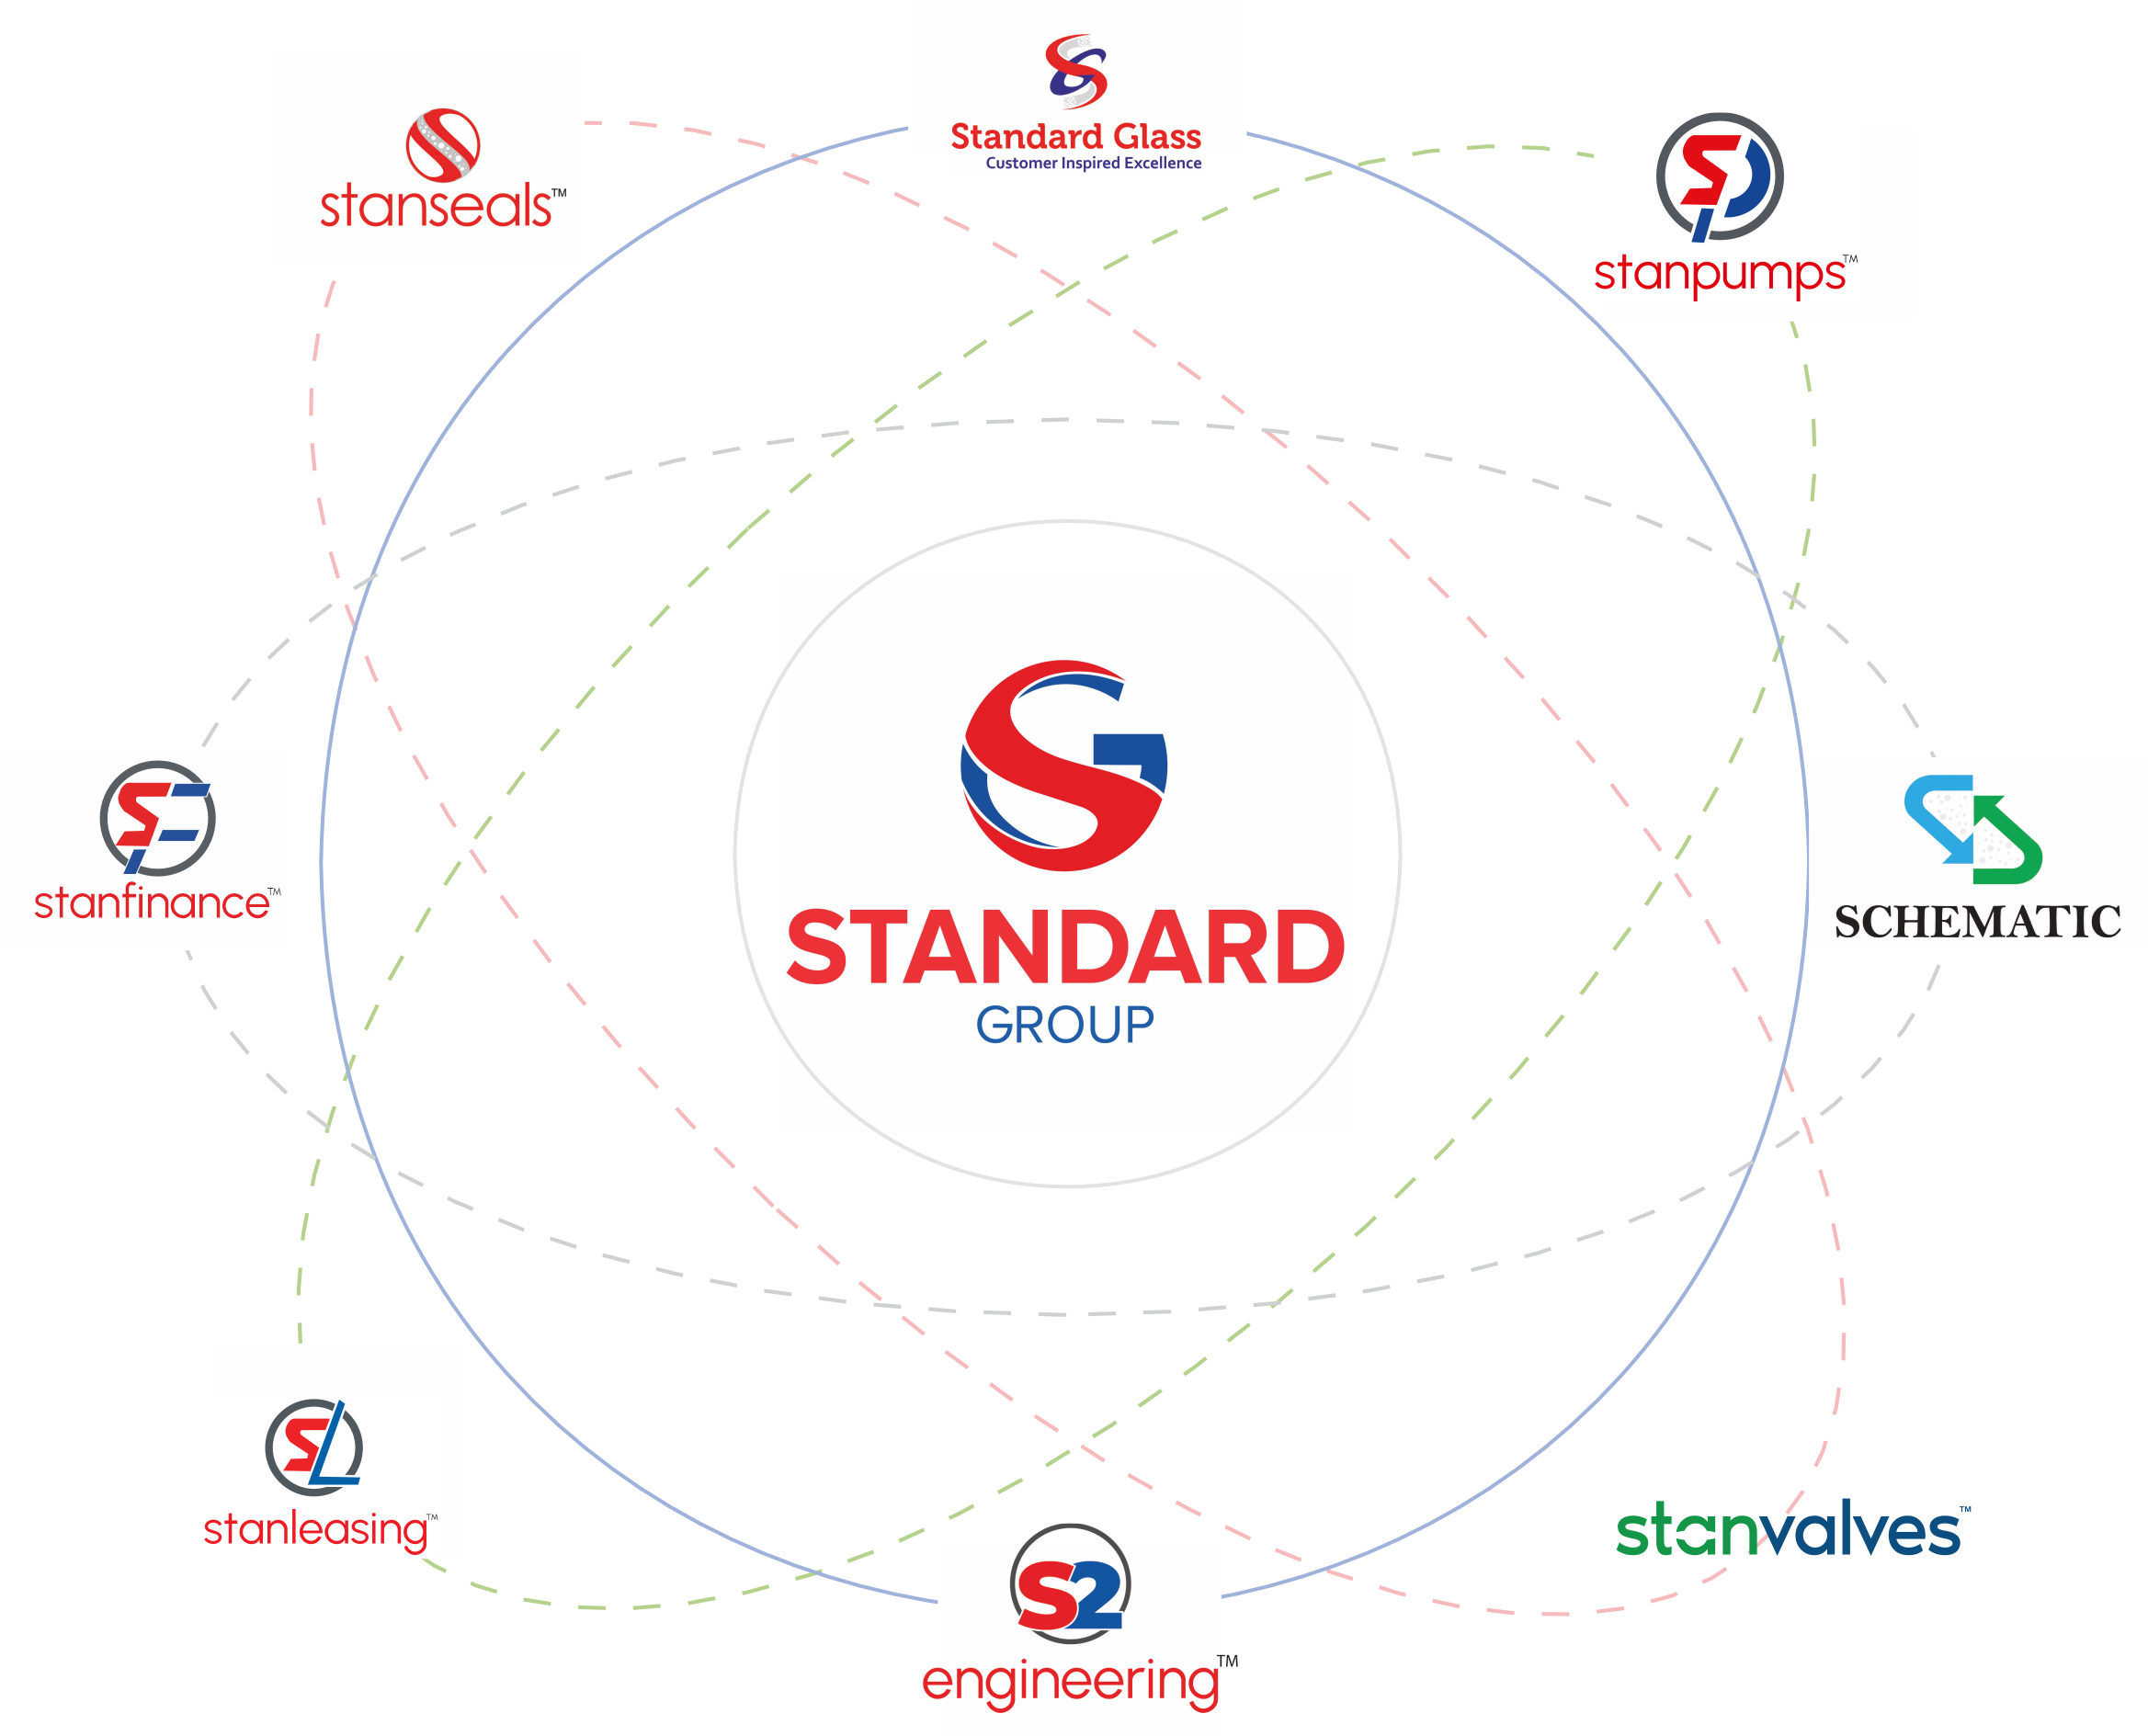 M/s. Standard Group of Companies